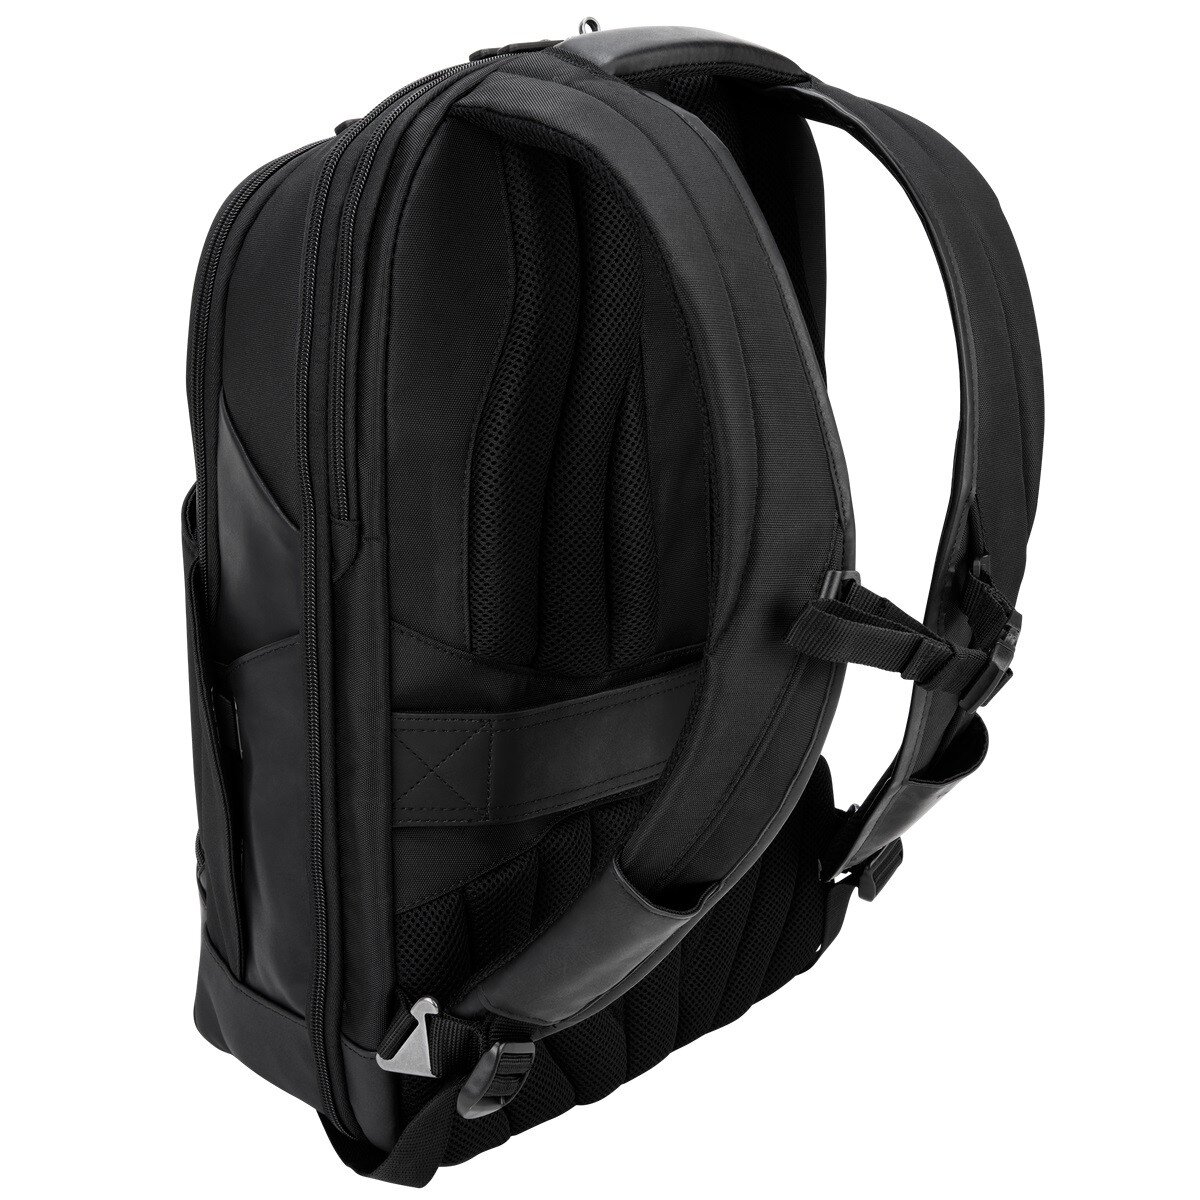 Vertx Gamut Checkpoint Tactical Backpack